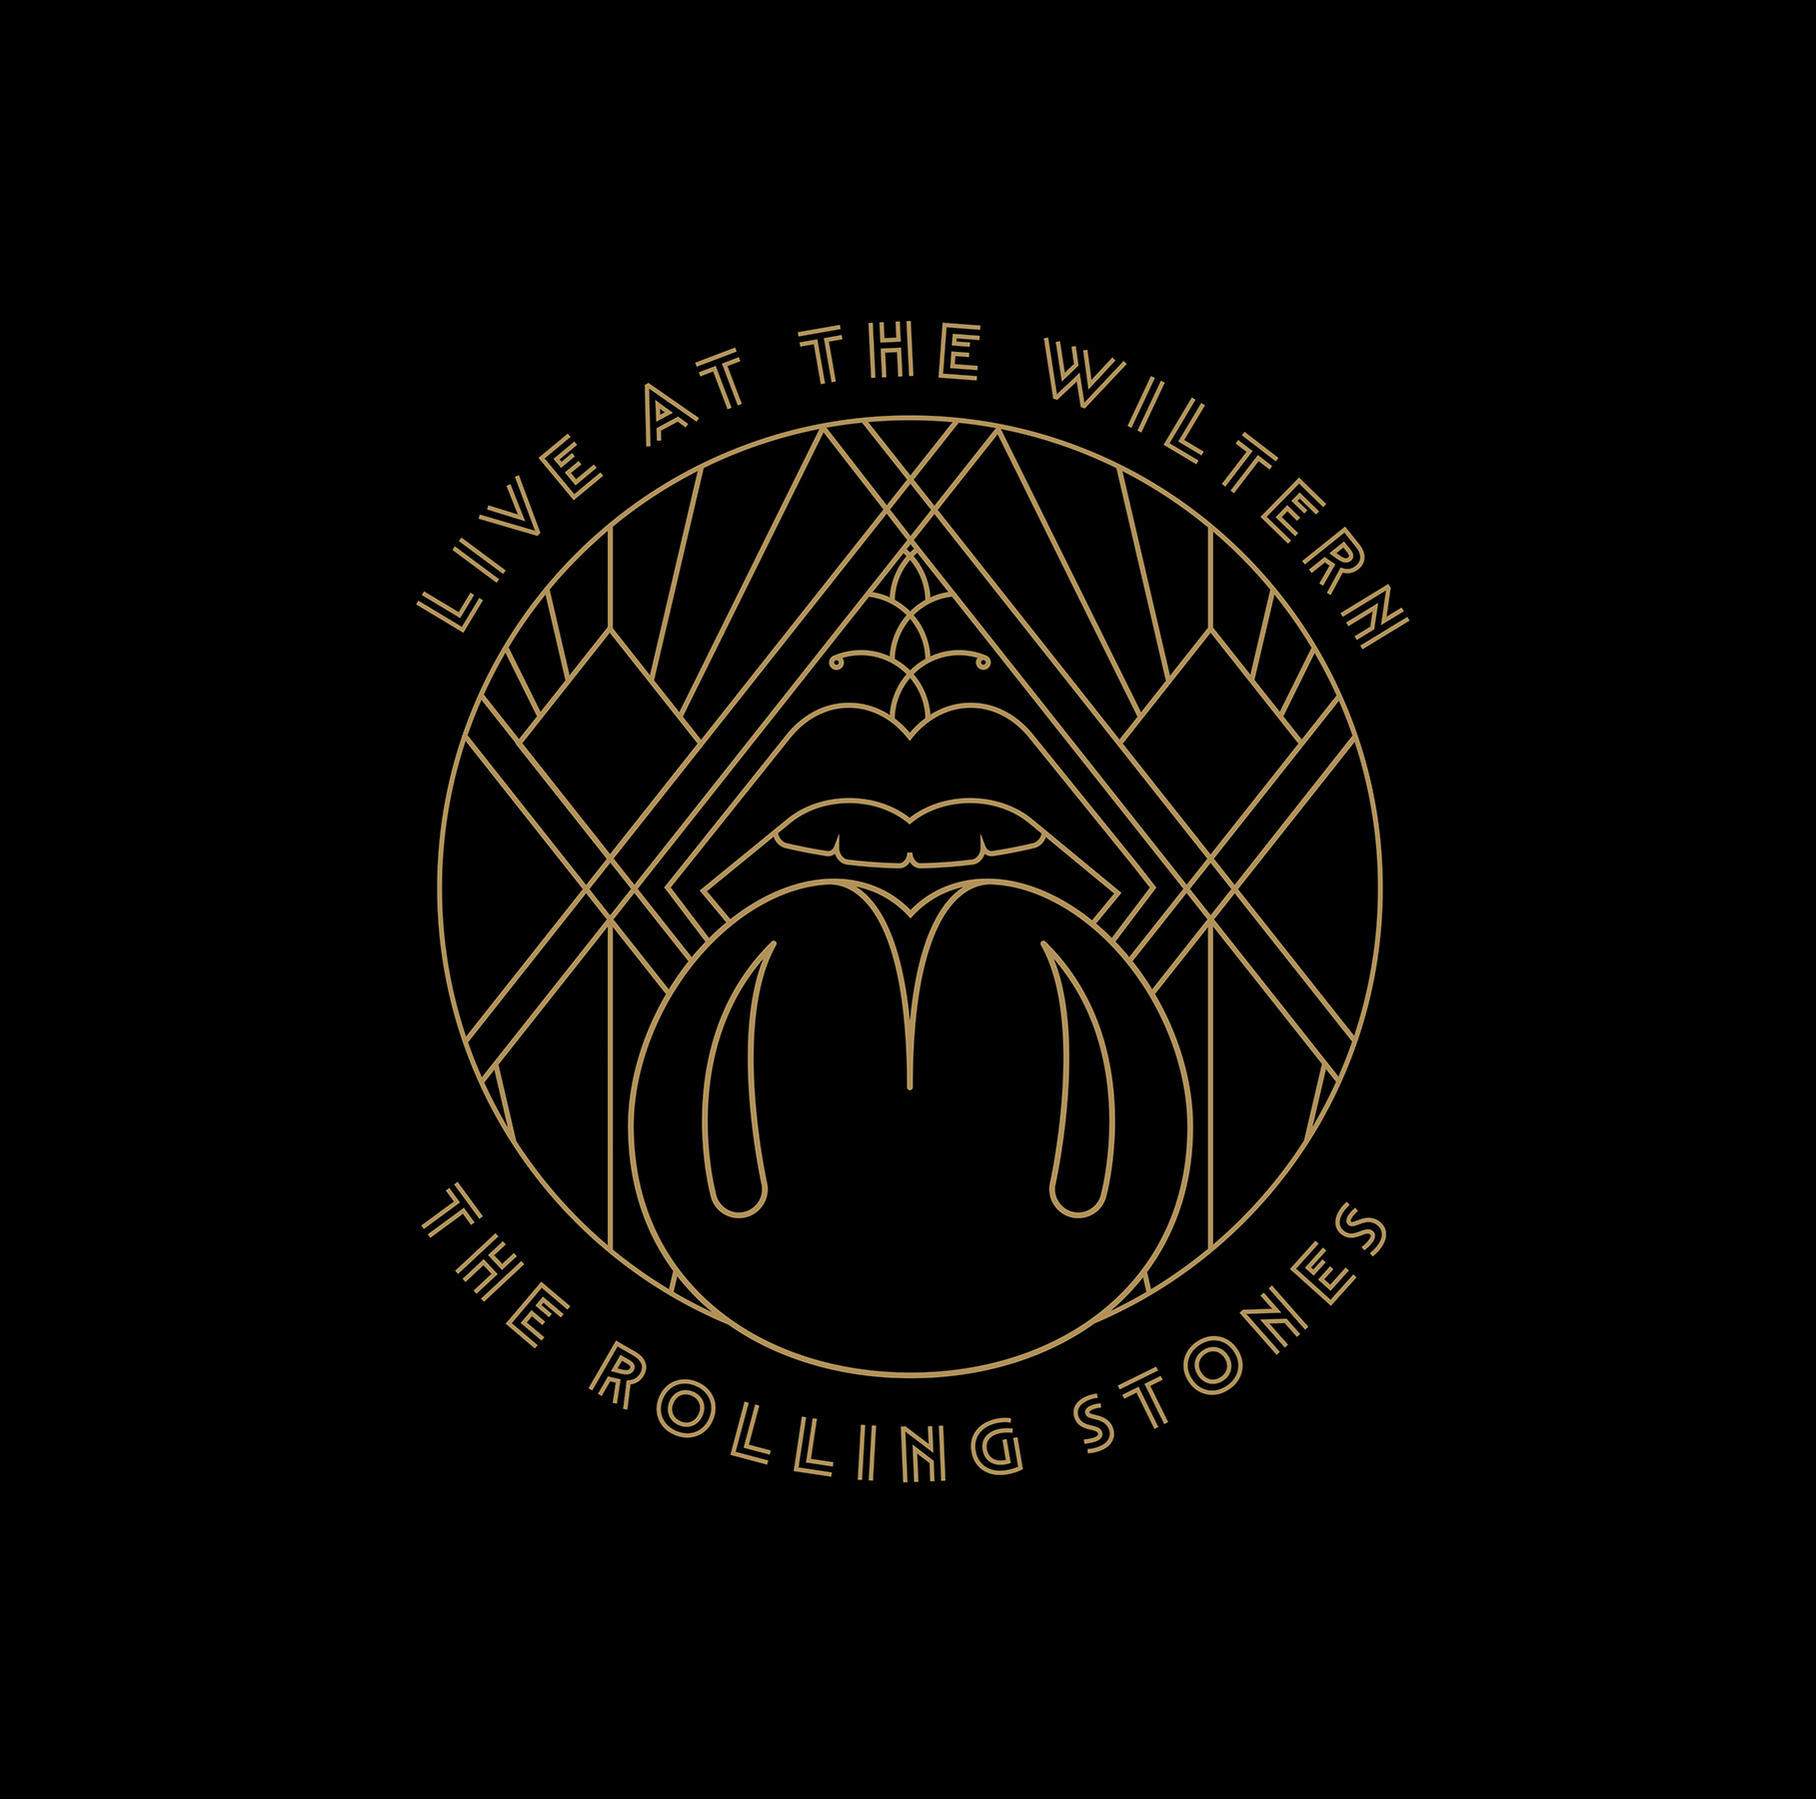 (Vinyl) at 3LP) Rolling the Stones - Wiltern / Angeles The (Los - Live